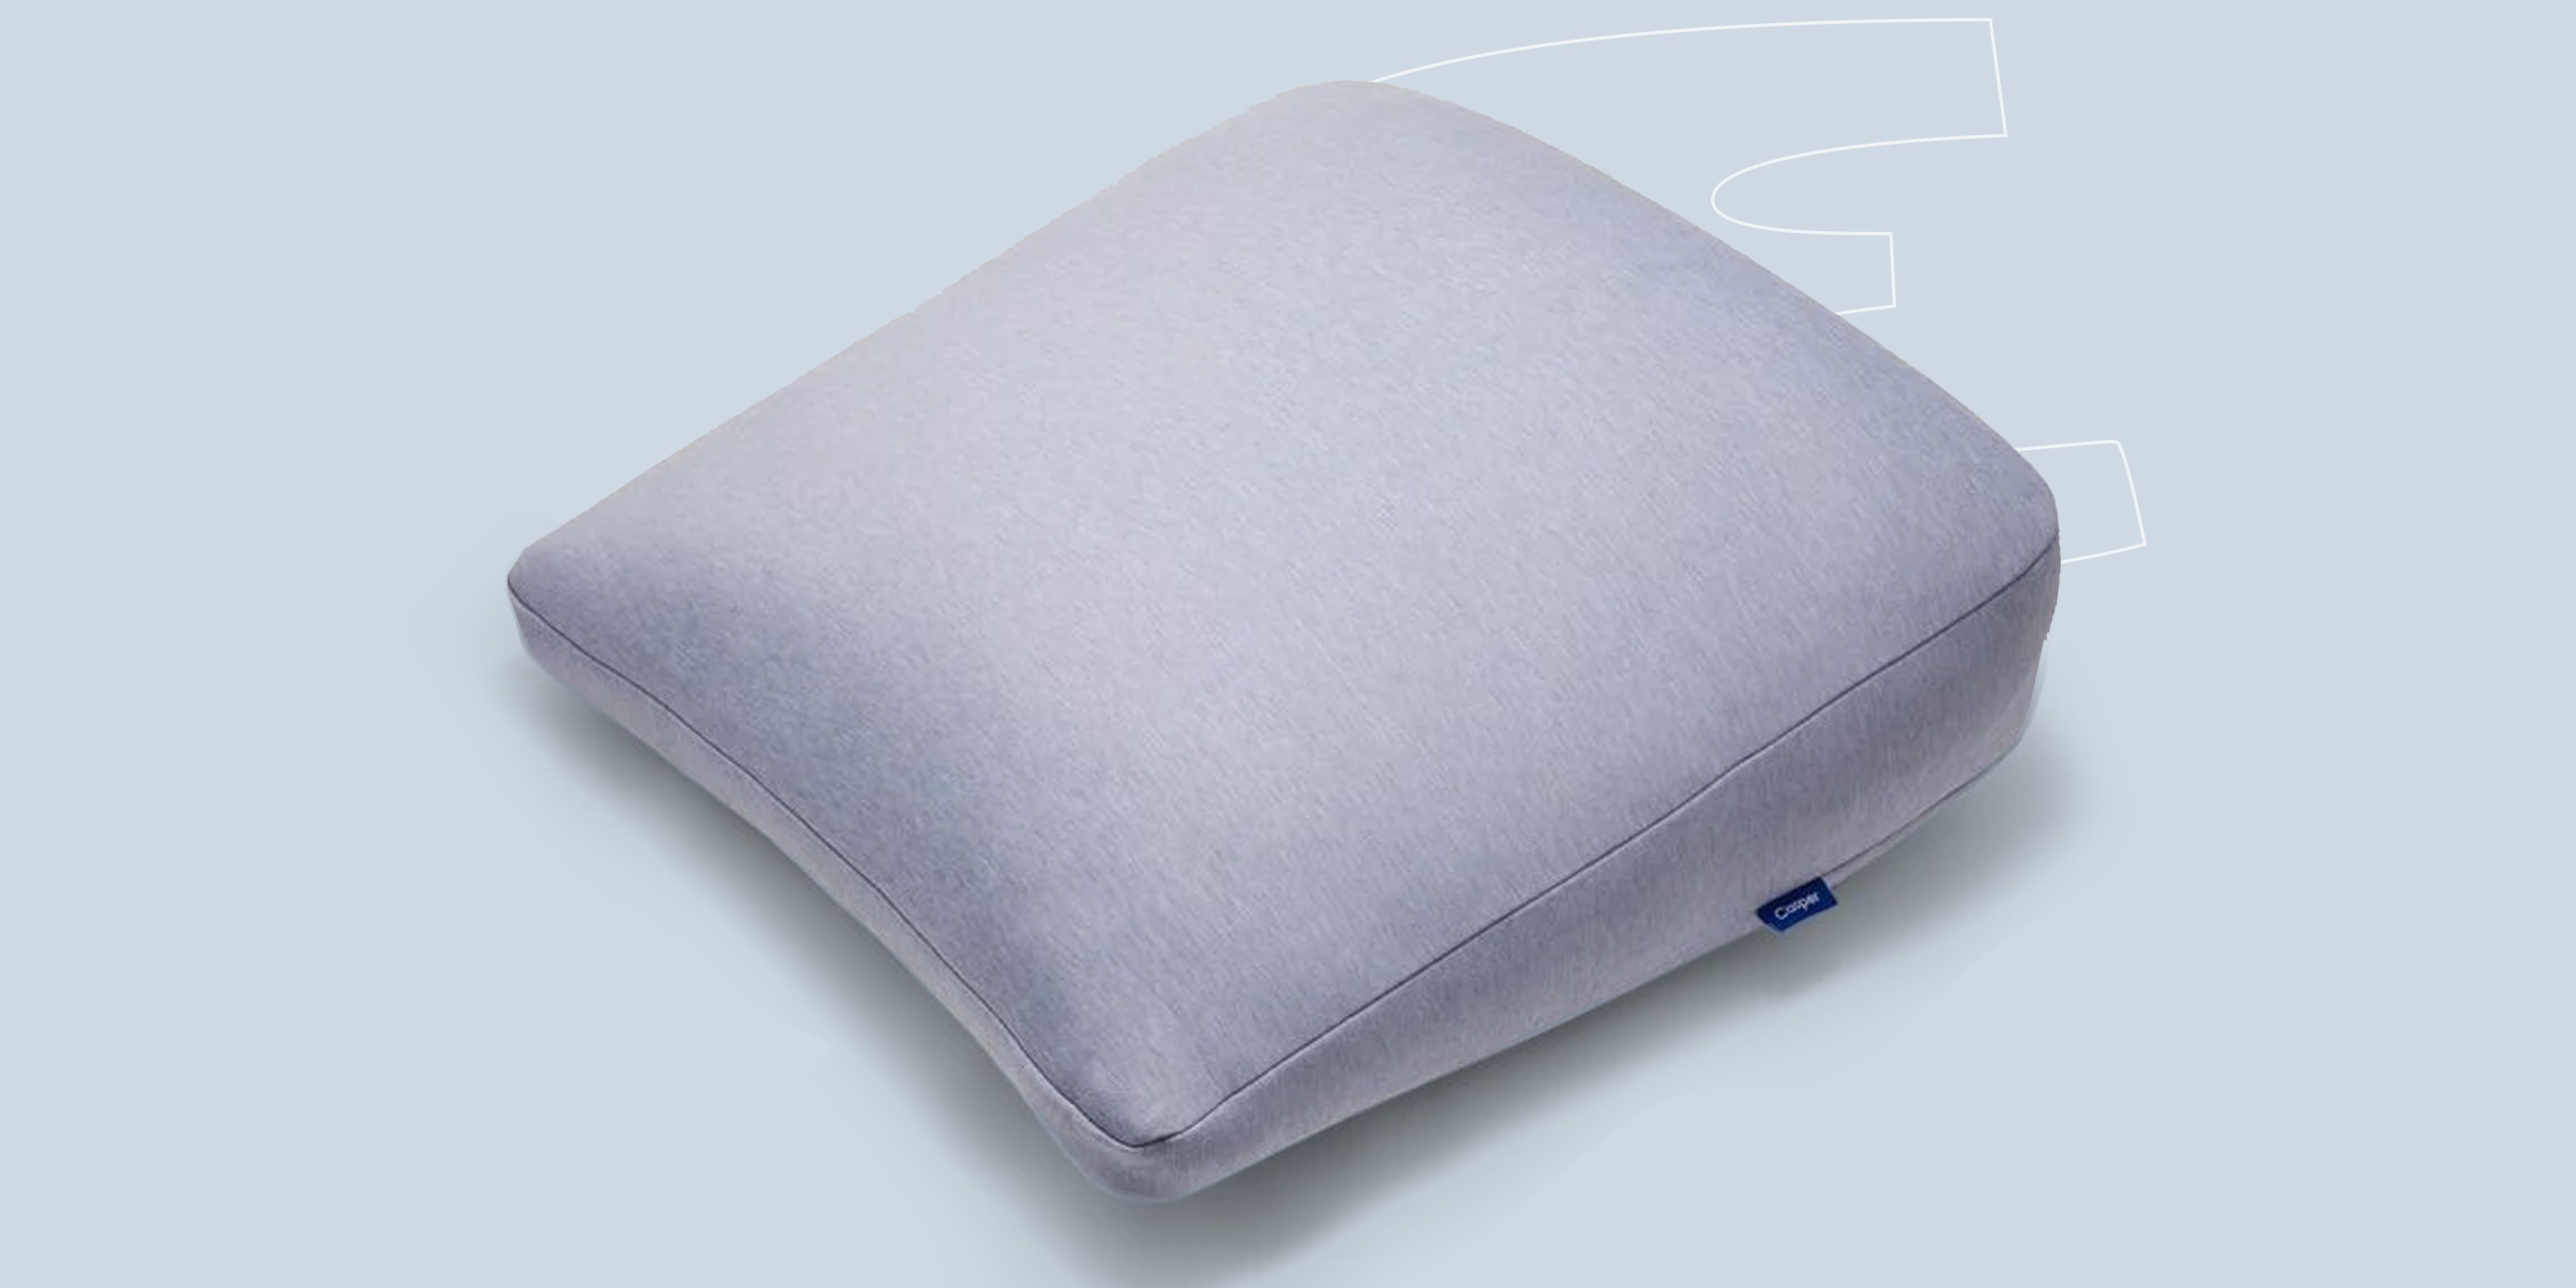 <p class="body-dropcap">Look, we know getting a new <a href="https://www.esquire.com/lifestyle/g45625897/best-luxury-pillows/">pillow</a> is not going to fix all of your sleeping issues. Especially when your sleeping issues are because you're pumping caffeine into your system until 5 p.m. and then doomscrolling yourself to sleep. However, if you have some sleep specific issues bothering either you or the people around you, then you could very well benefit from a few upgrades. Snorers, these are for you.</p><p class="body-text">There are many reasons that you might be snoring, and I'm here to <a href="https://www.esquire.com/lifestyle/g44725550/best-cooling-pillow/">recommend pillows</a>, not to give medical advice. Anyway, just based on the laws of physics, you're less likely to snore if your airways are free and clear. And your airways are more likely to be free and clear if you've positioned your body in such a way that doesn't involve, say, sleeping face-down on your stomach. Some say <a href="https://www.esquire.com/lifestyle/health/g40747675/best-pillows-for-side-sleepers/">side sleeping</a> helps, while others say on your <a href="https://www.esquire.com/lifestyle/g46503522/best-pillow-for-back-sleepers/">back</a>. This matters less because I personally care about how you're sleeping and more because your preferred sleep contortions determine the kind of pillow support that you'll need. </p><p class="body-text">When you're shopping for a <a href="https://www.esquire.com/lifestyle/g45625897/best-luxury-pillows/">pillow</a> to address that snoring, first look for firmness. Something like a memory foam or latex is going to be a better longterm bet than a soft down because they're built to stay up and not pack down into themselves over time. There are some pillows that have more support in the neck so that you can target support where you need it. Look to alternative shapes, too. Some pillows have teardrop or wedge shapes, which gradually increase in size for a subtle supportive sleep. (These also make great support pillows for <a href="https://www.esquire.com/lifestyle/g46773894/best-pillows-for-sitting-up-in-bed/">reading in bed</a> or on the couch.) Here, we've rounded up some of the pillows that ease snoring the best. </p>